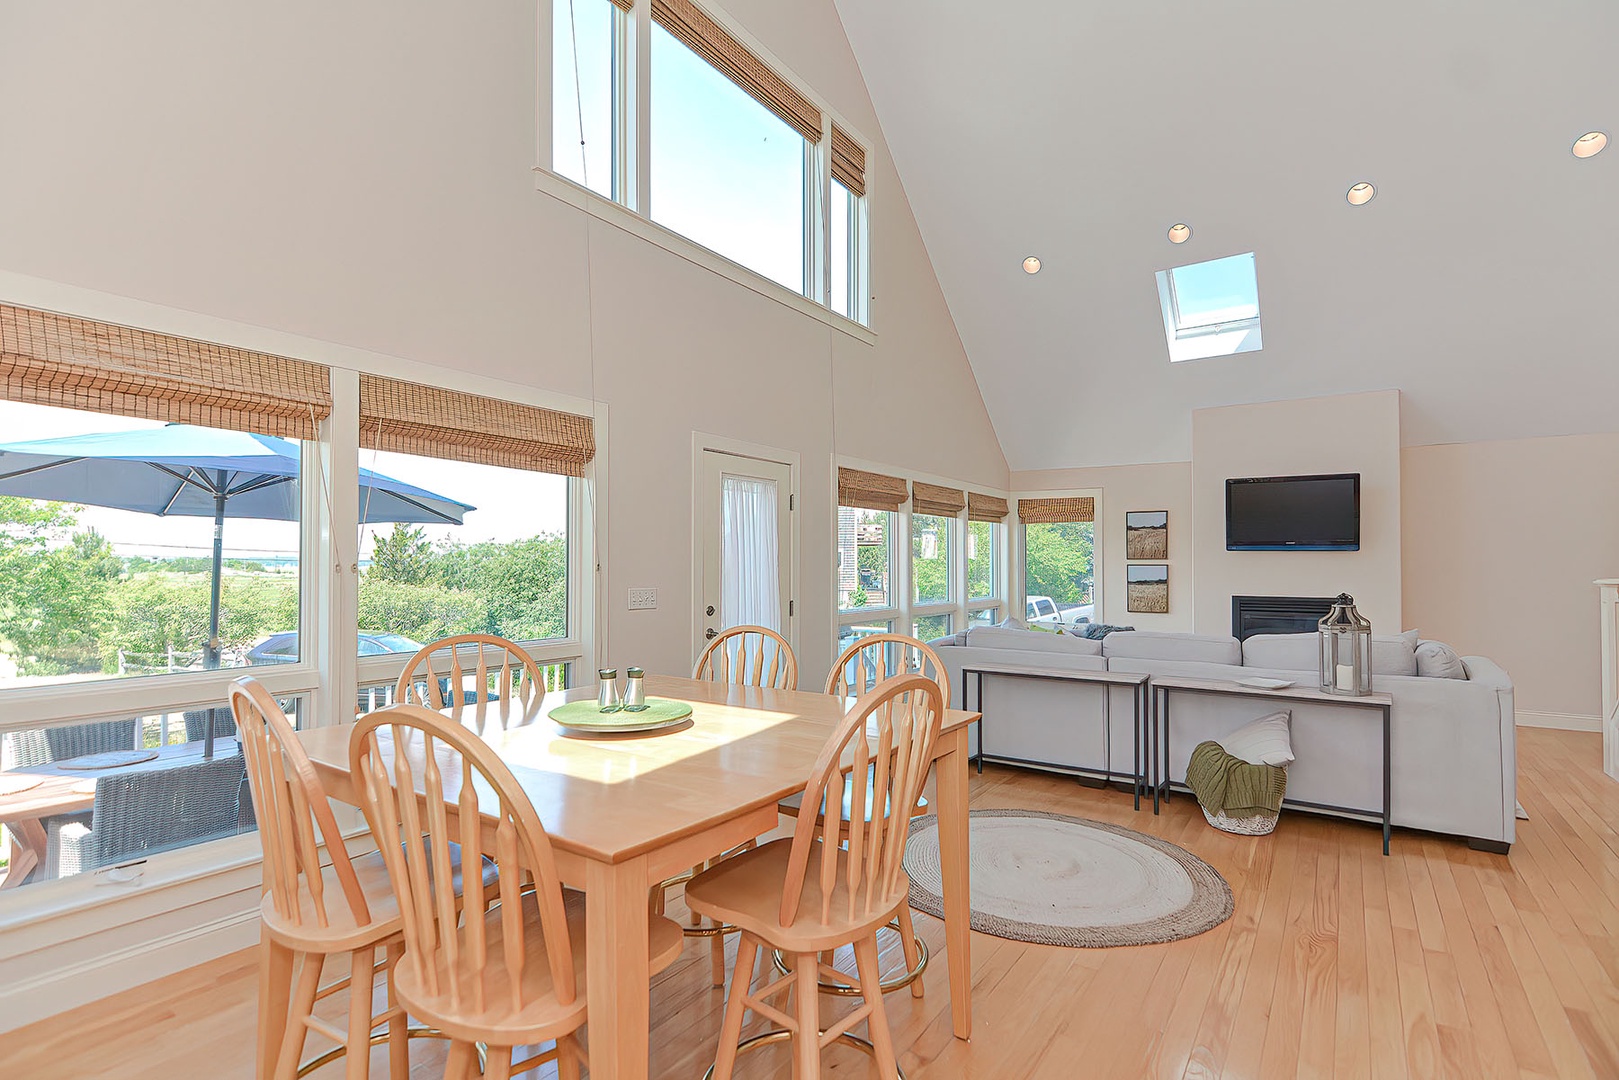 The many large windows and skylights fill the room with natural light.